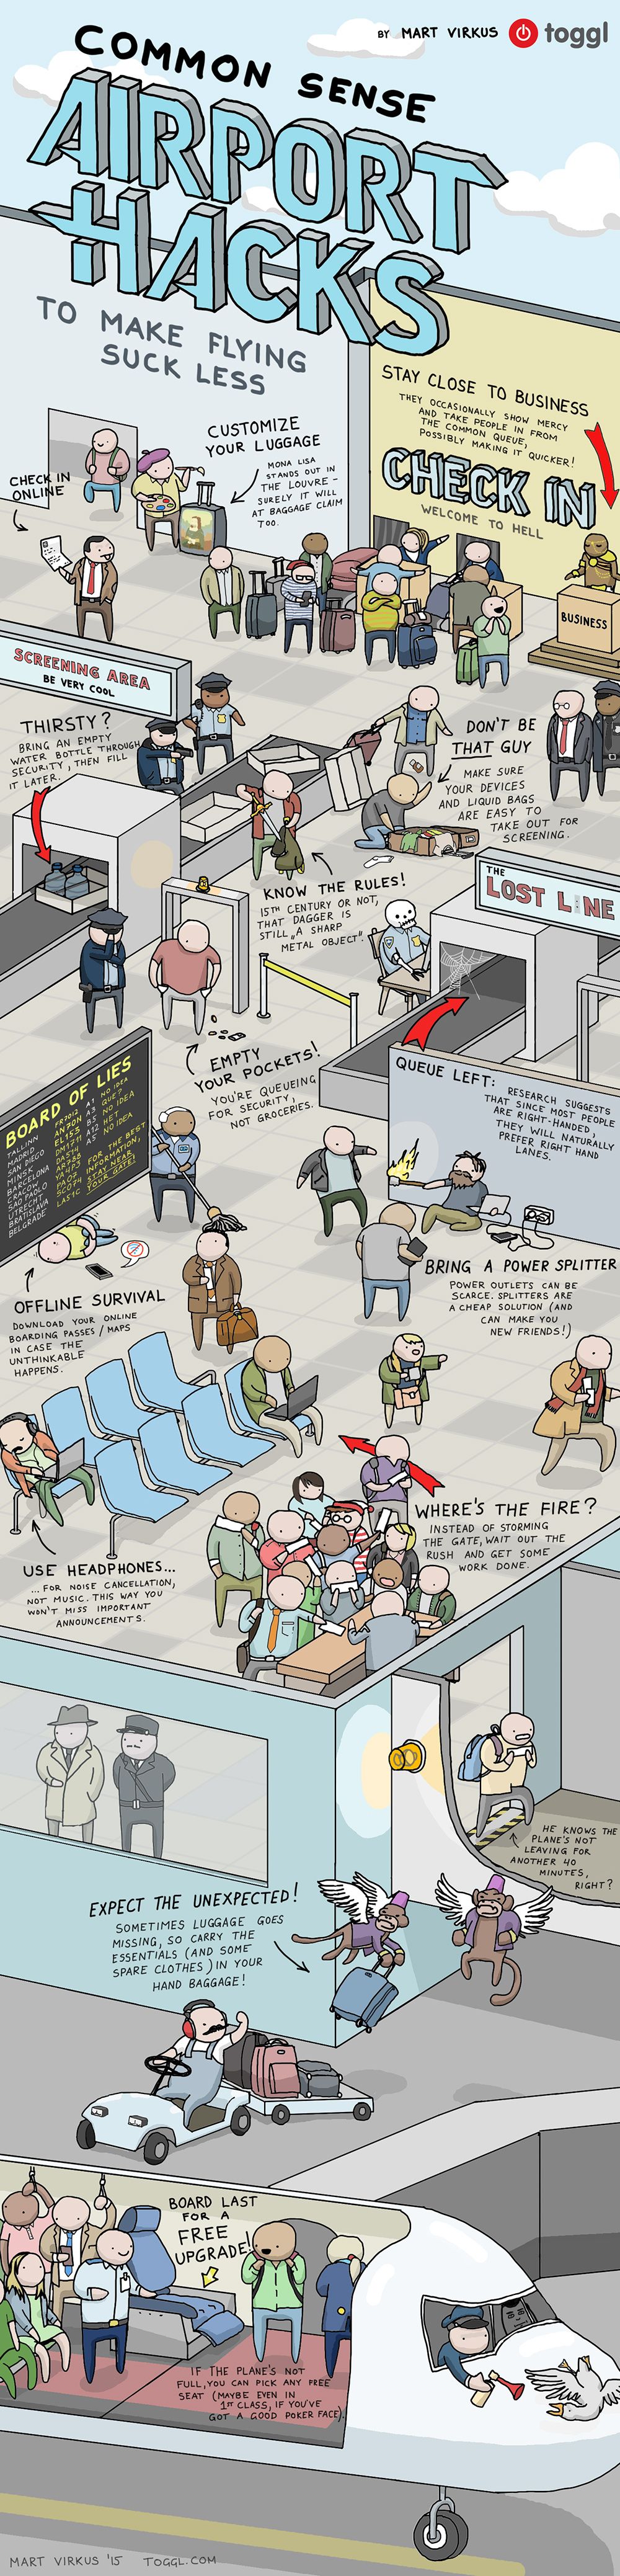 Infographic: Easy Airport Hacks To Make Flying Suck Less